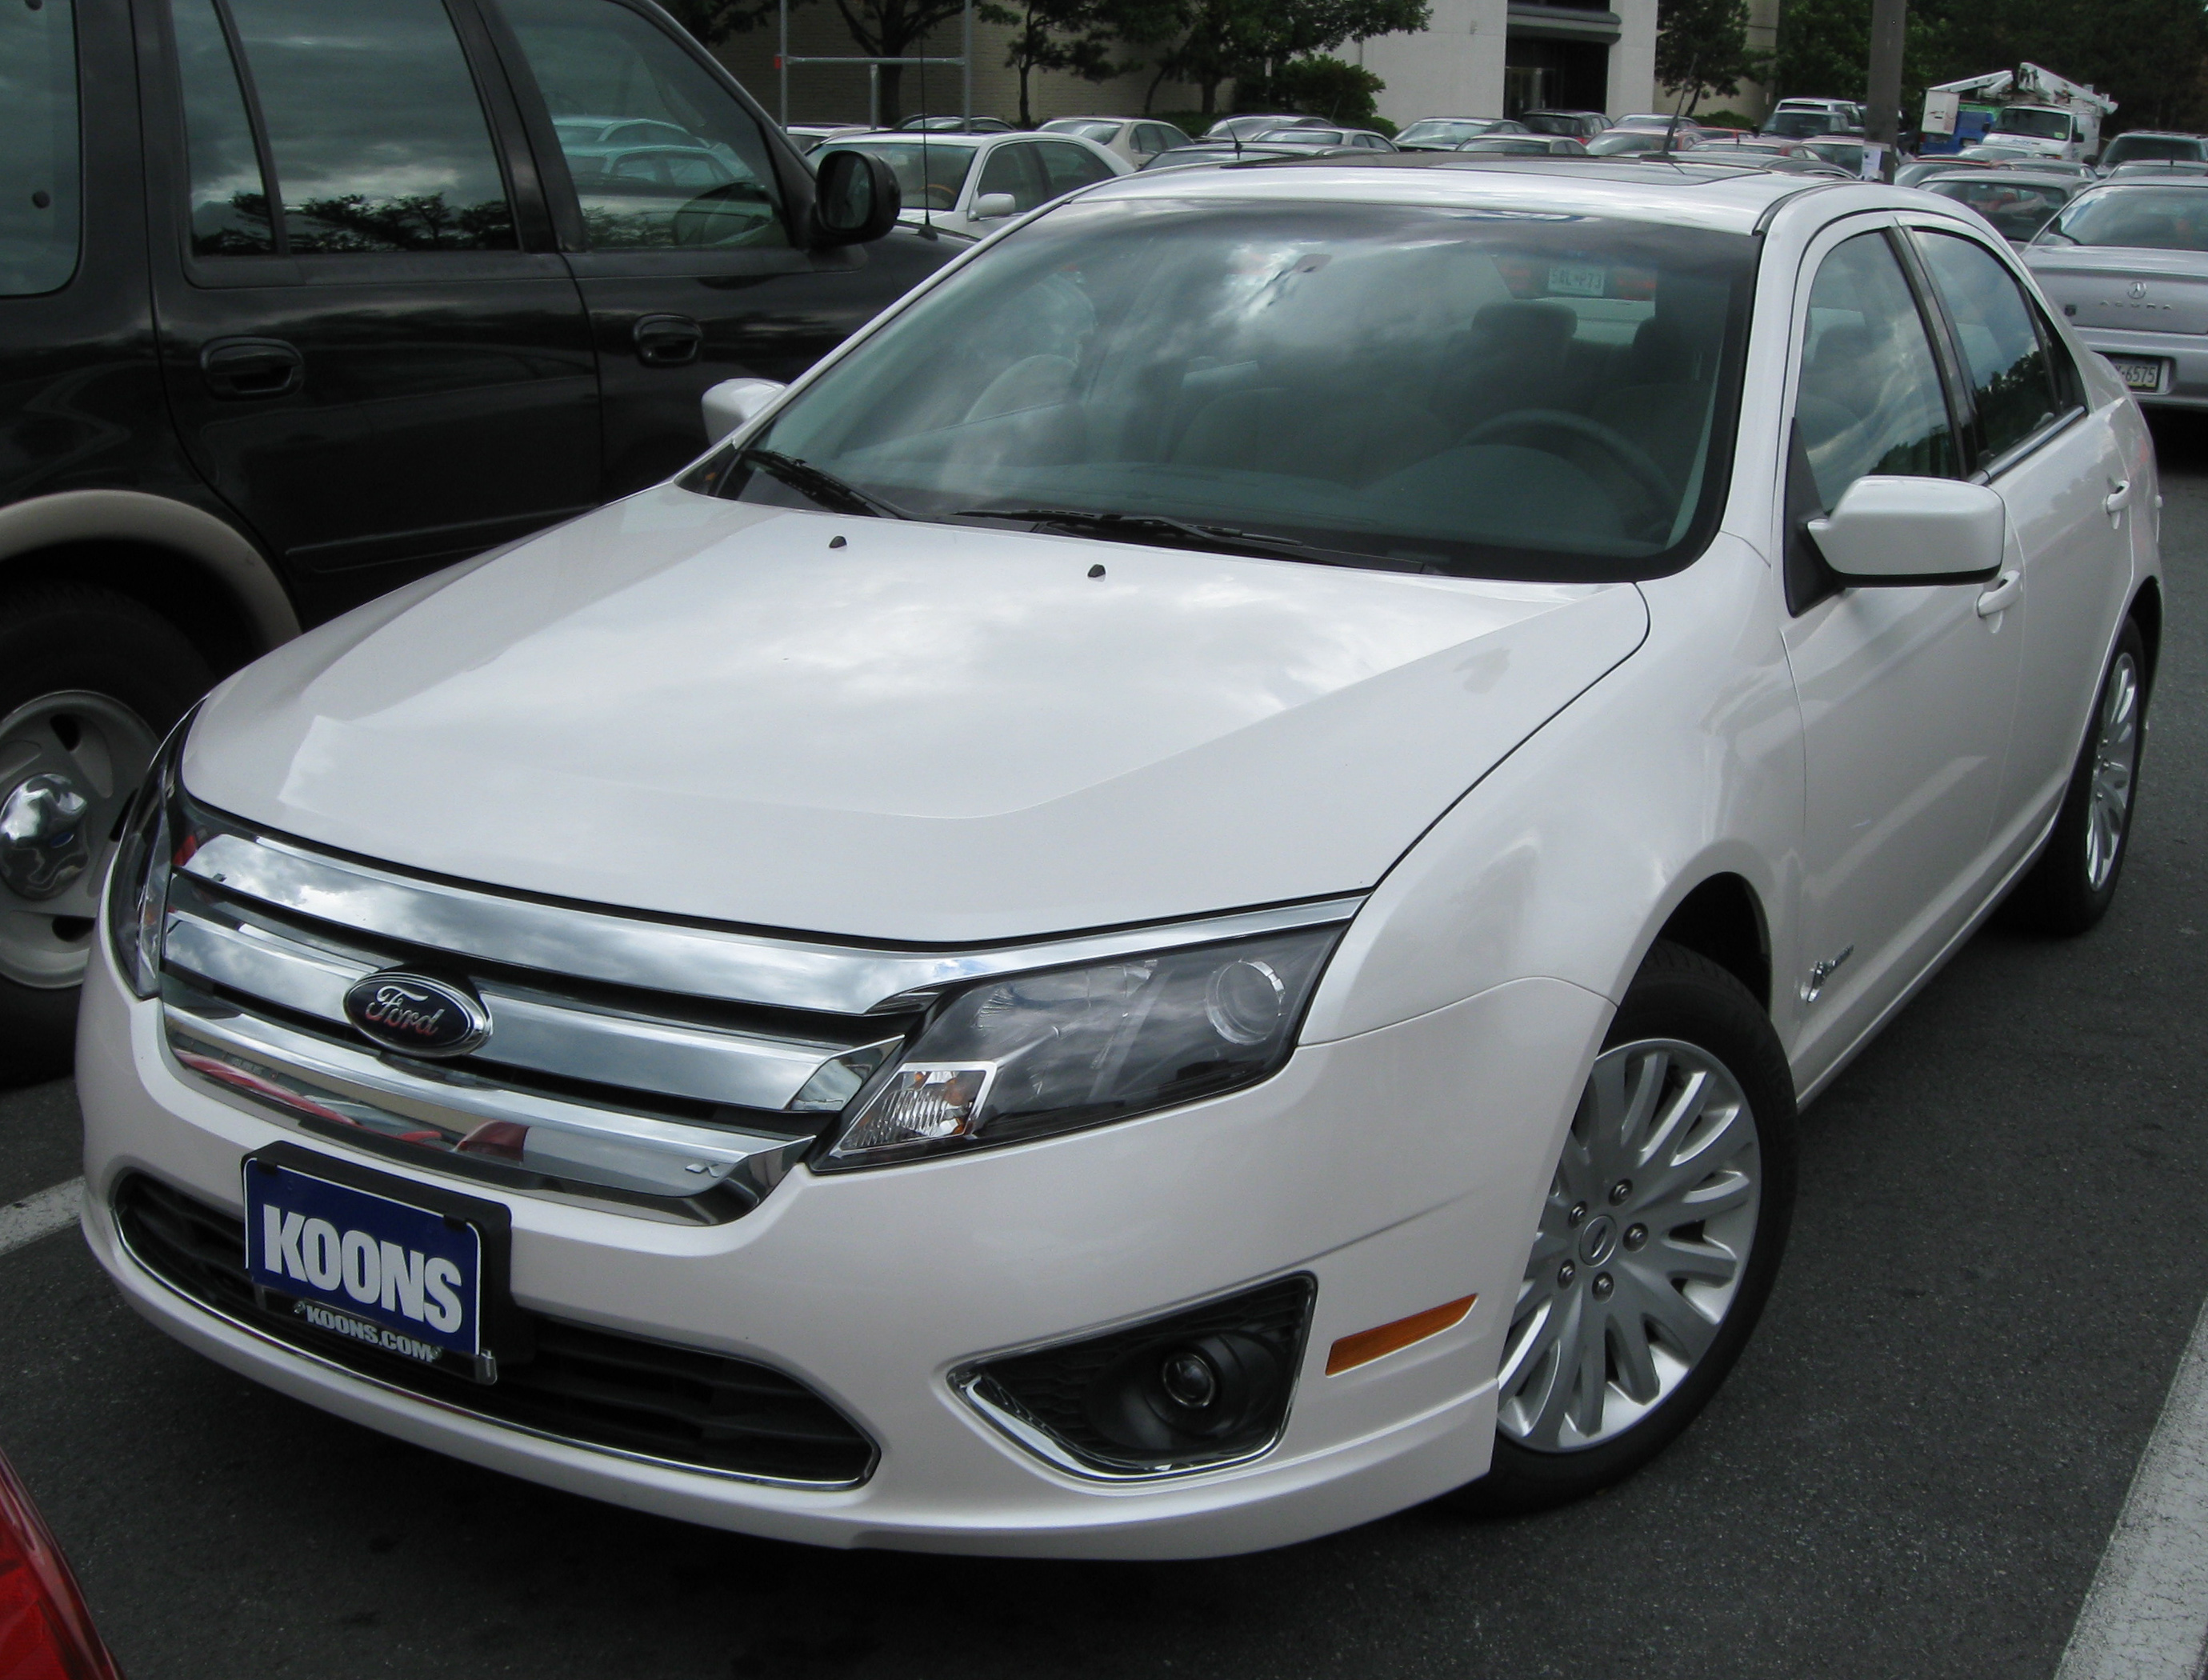 Ford Fusion 2010 on File 2010 Ford Fusion Hybrid 1    08 21 2009 Jpg   Wikimedia Commons